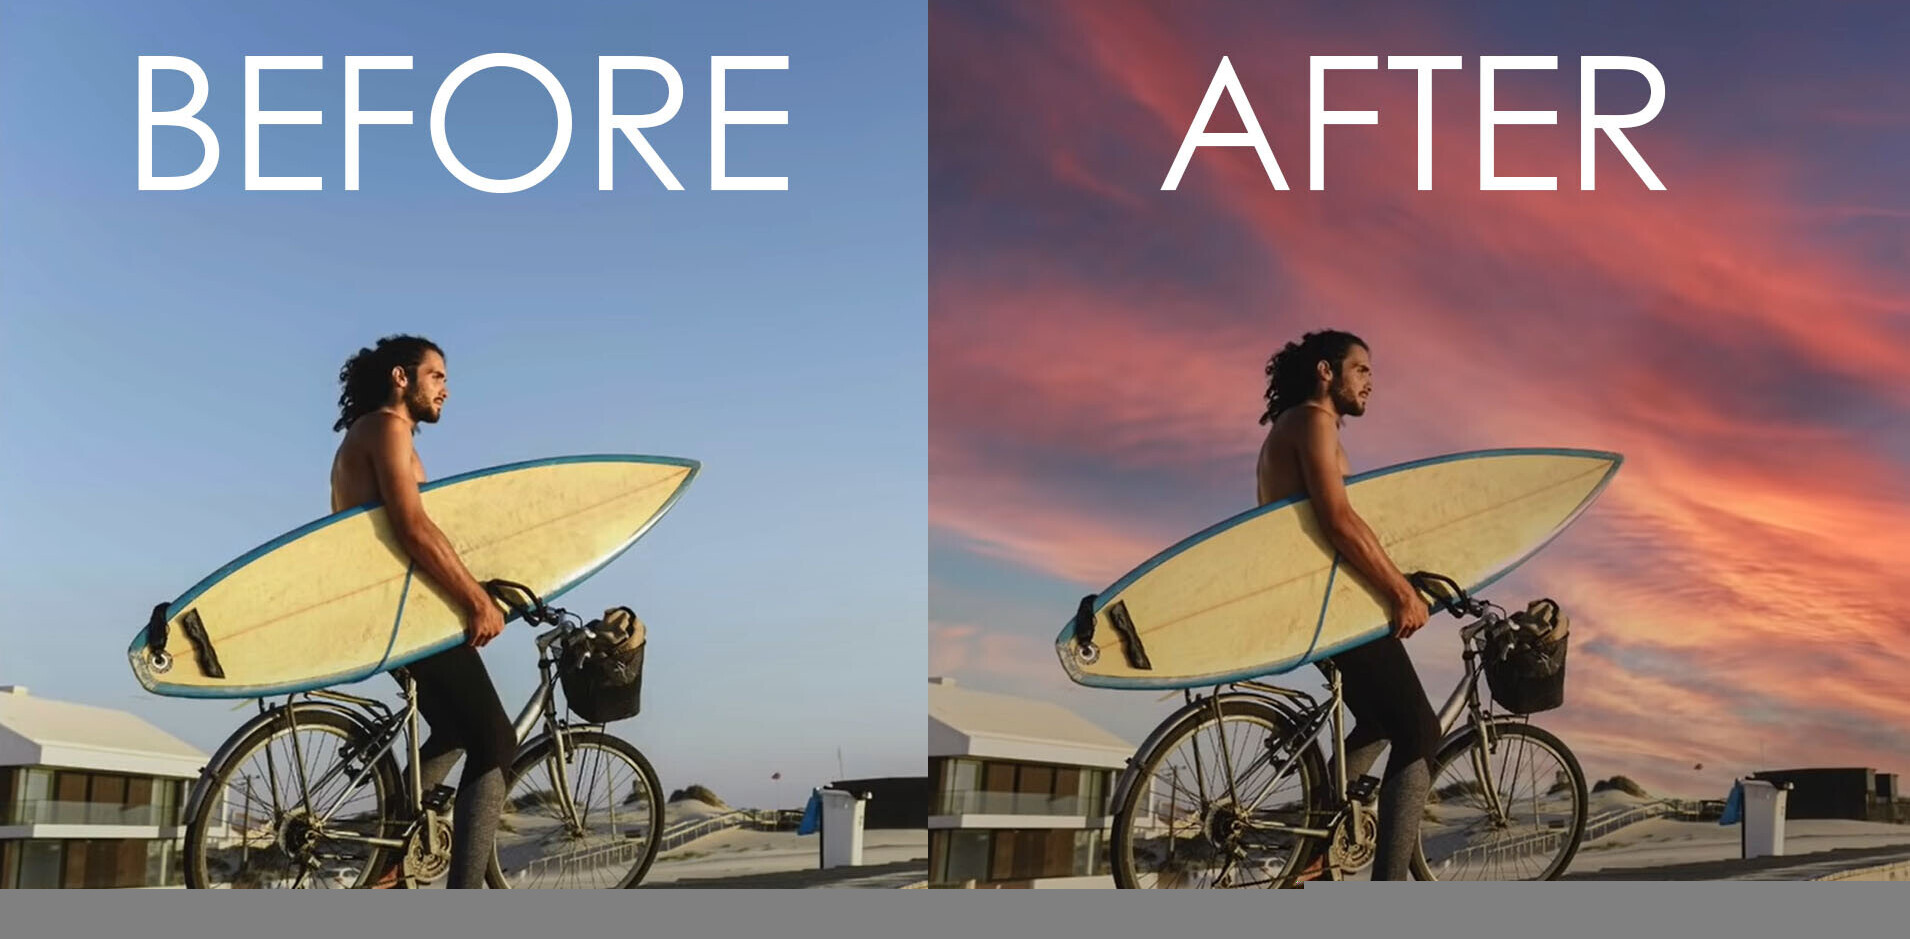 Photoshop’s new tool makes it ridiculously easy to change the sky